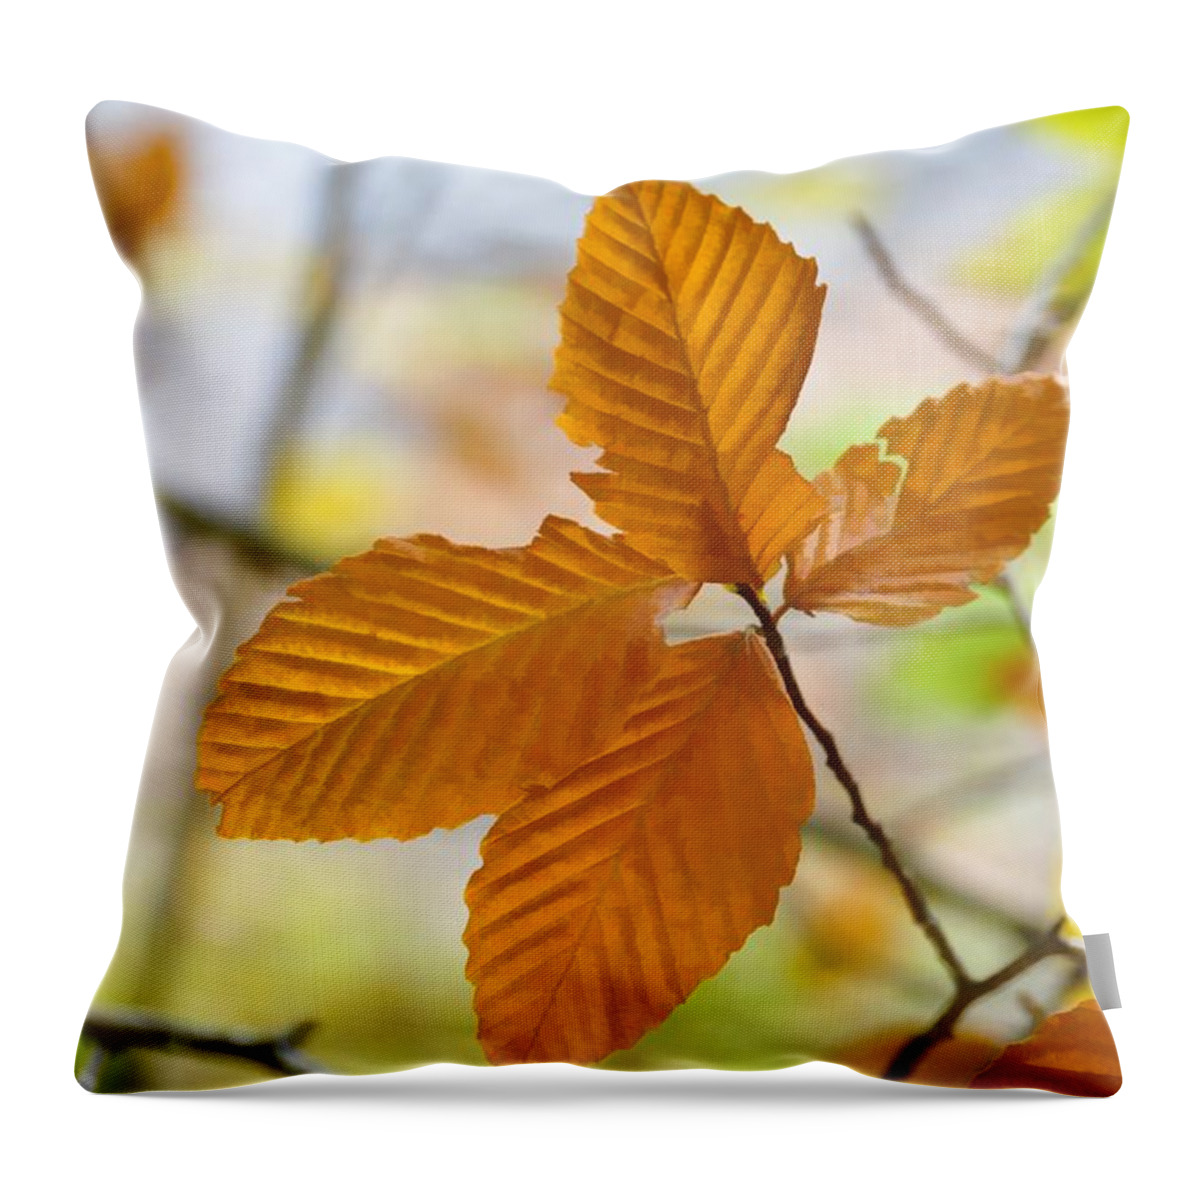 Still Life Throw Pillow featuring the photograph Touch Of Gold by Jan Amiss Photography